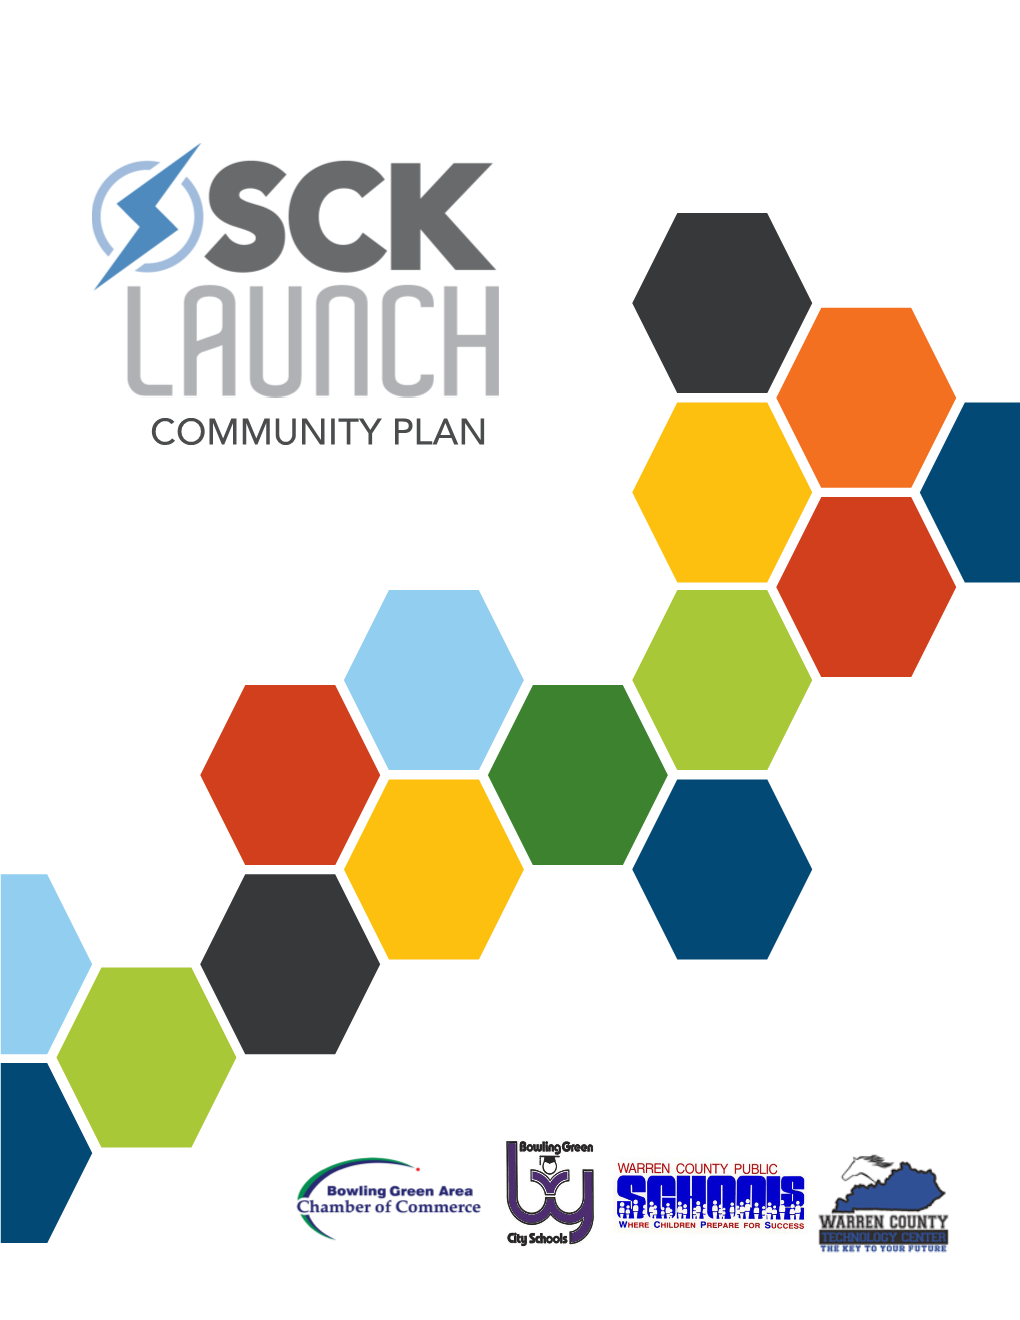 COMMUNITY PLAN Welcome to SCK LAUNCH!